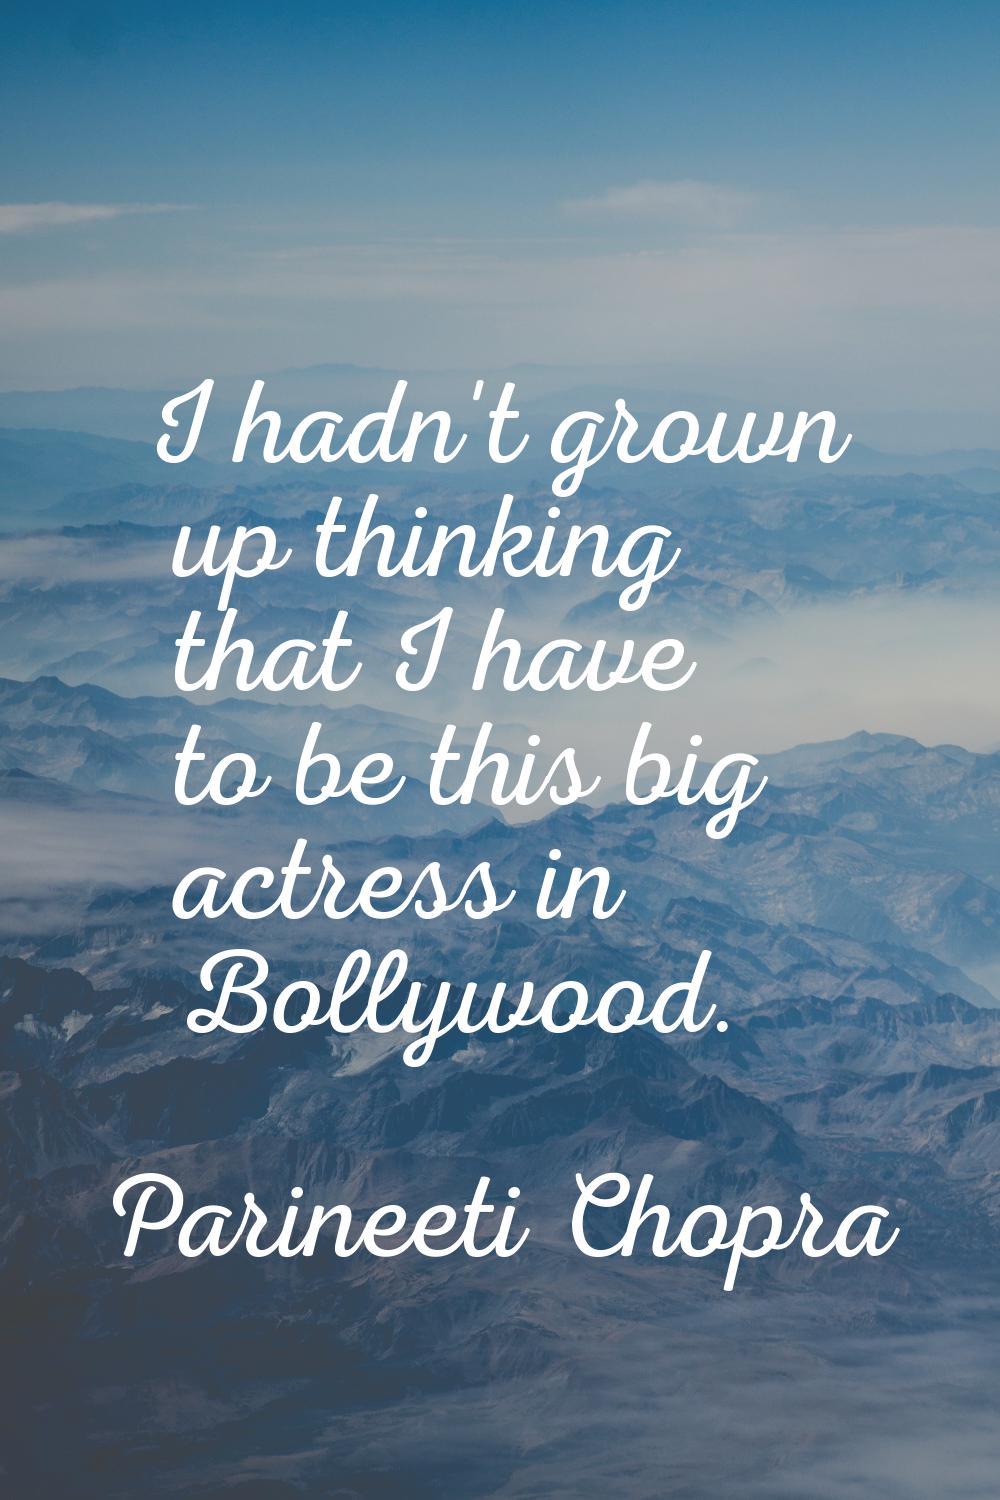 I hadn't grown up thinking that I have to be this big actress in Bollywood.